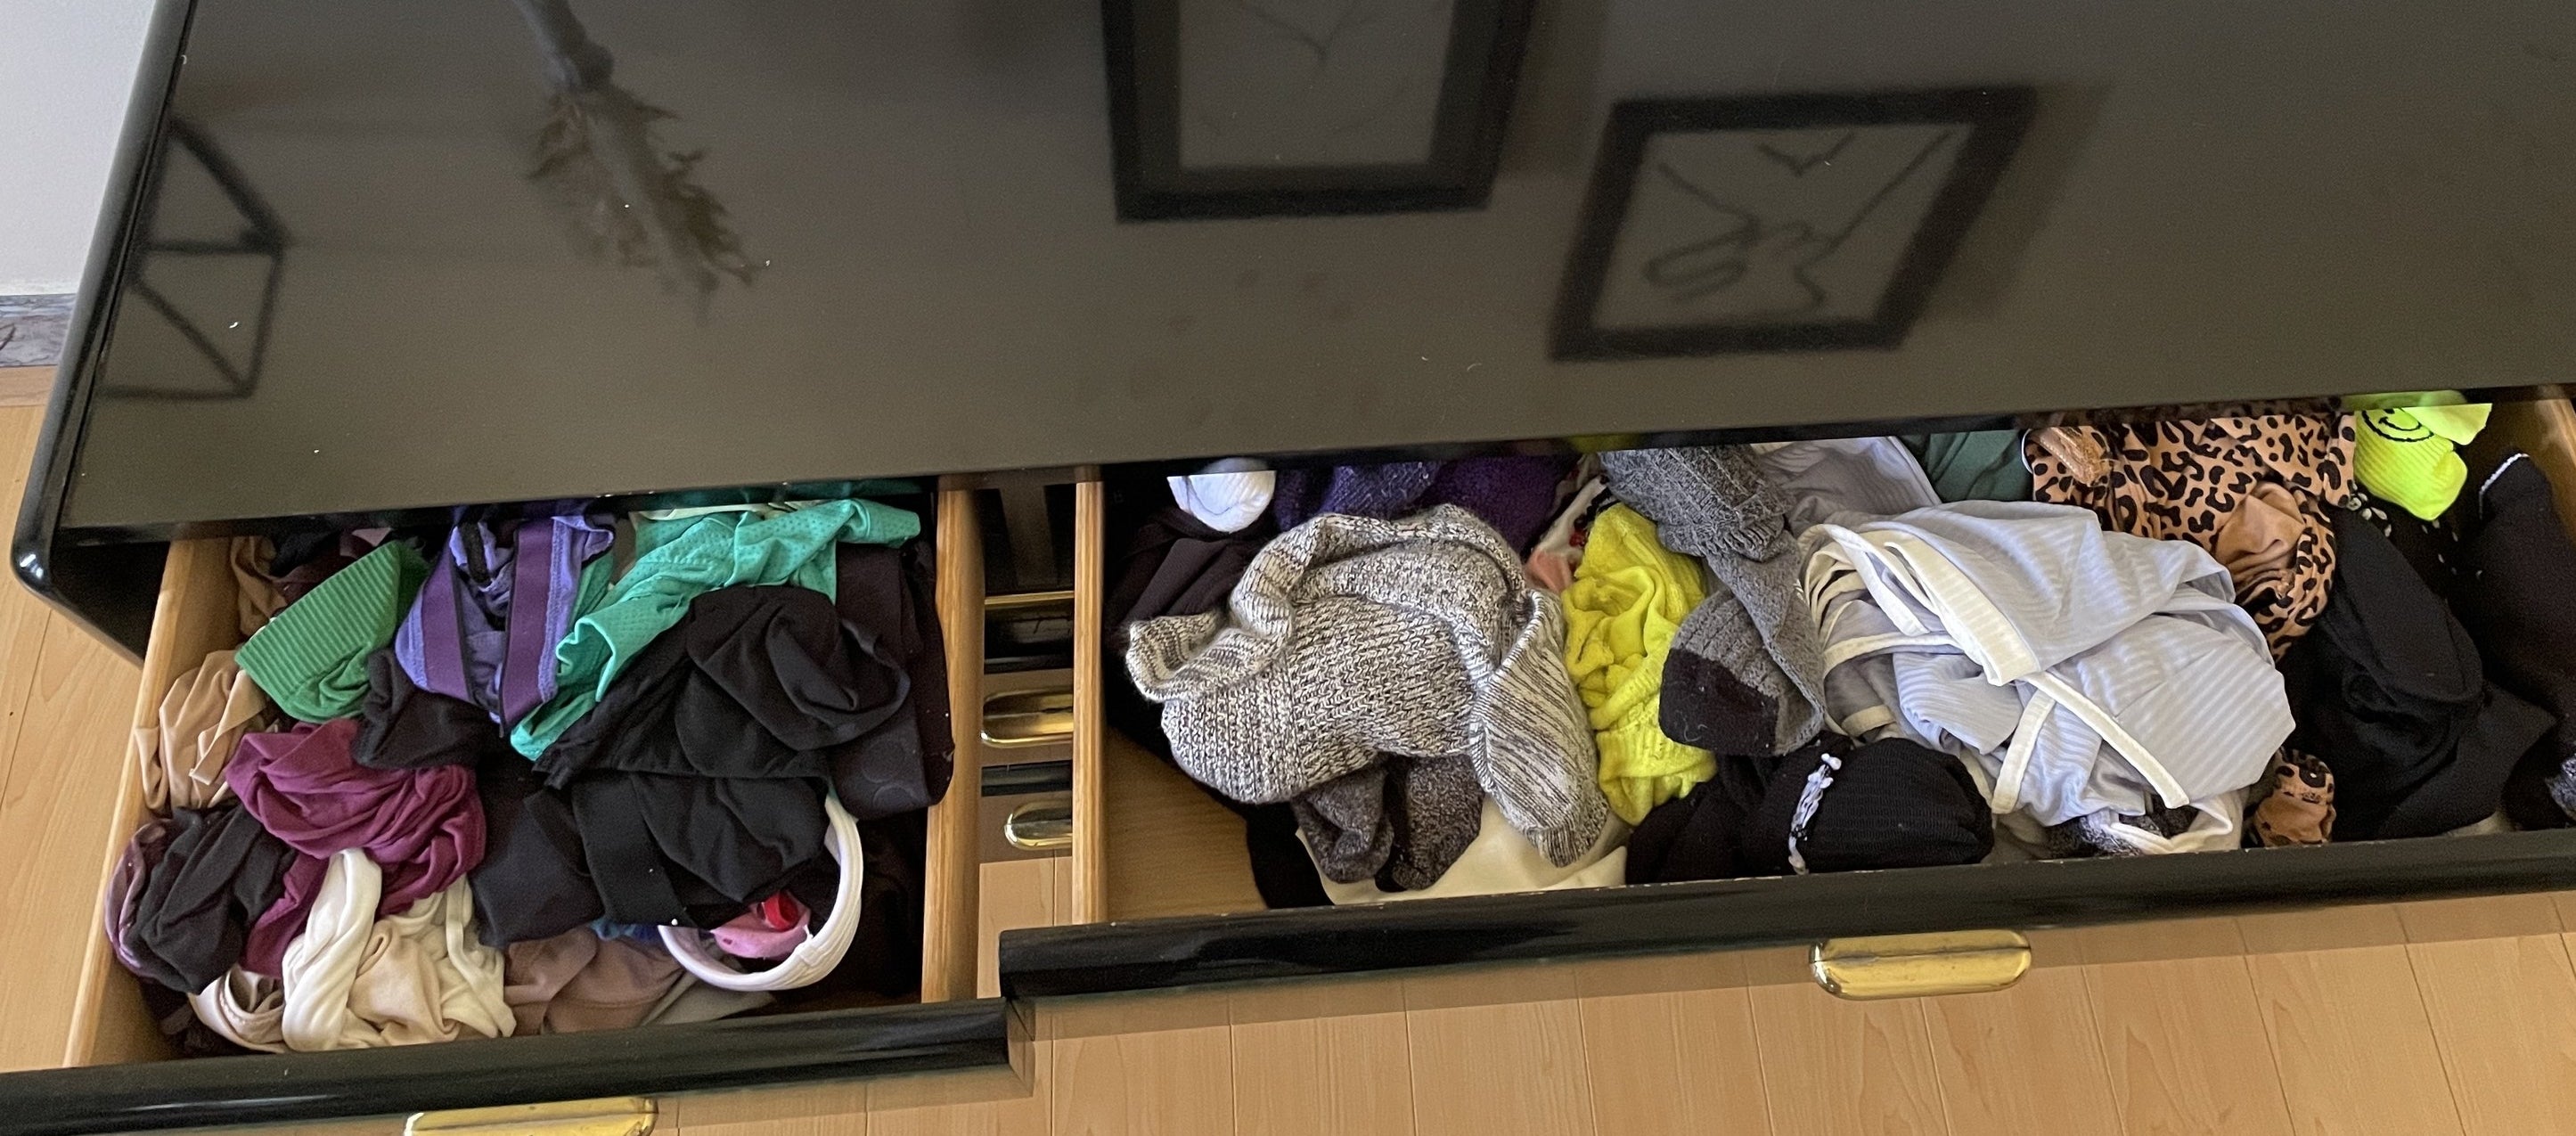 Another look at the underwear drawers, in which nothing is folded or properly stacked